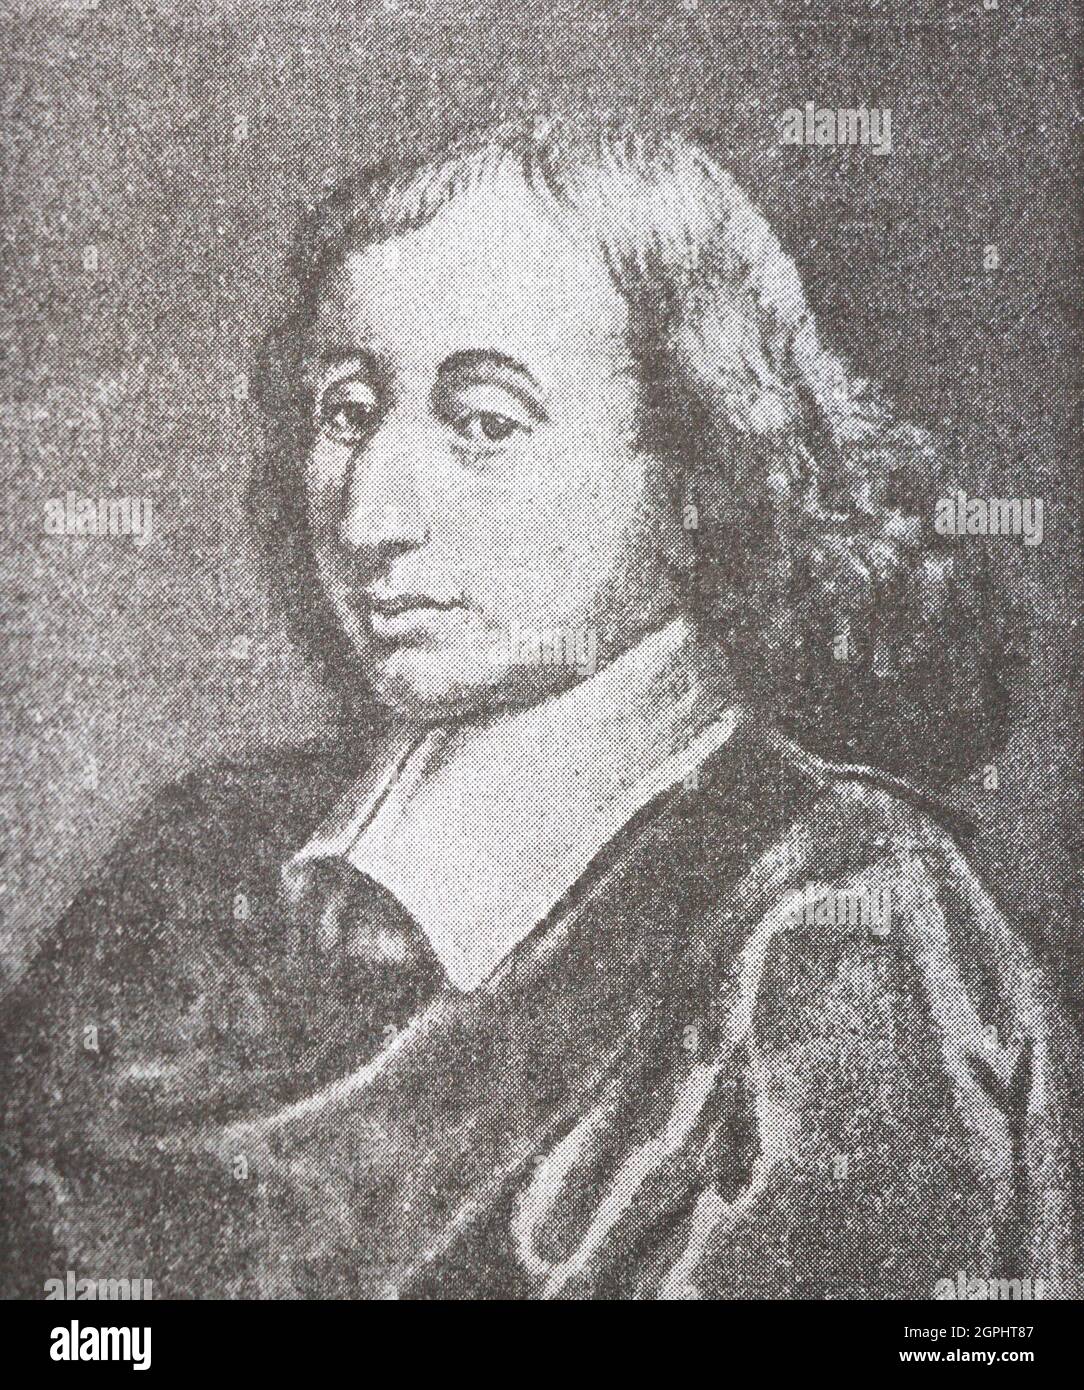 Blaise Pascal. Incisione medievale. Foto Stock